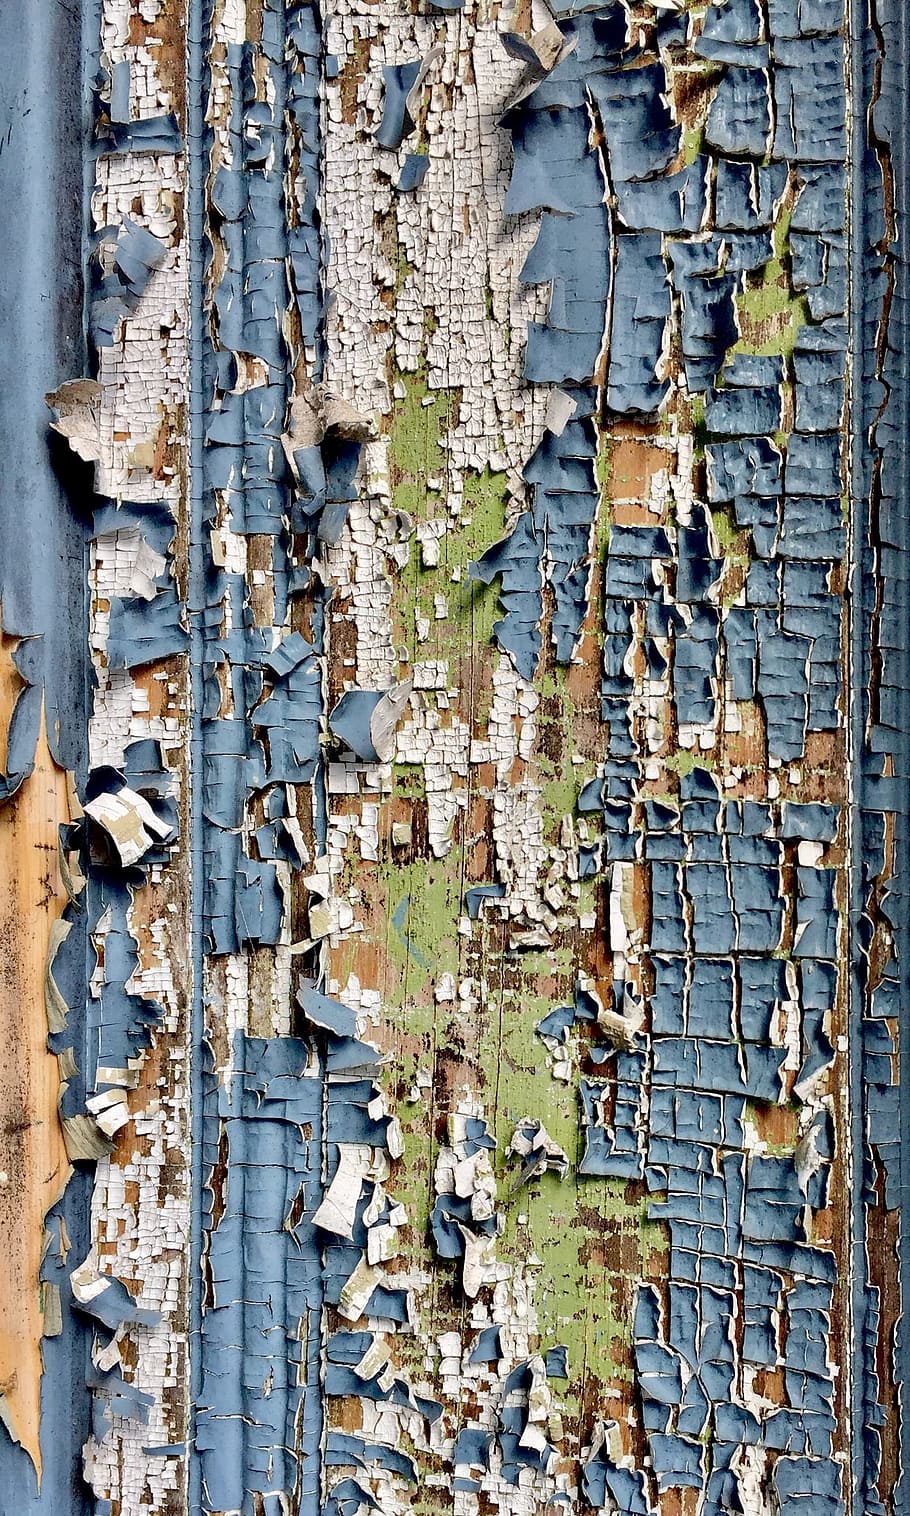 Paint, Crackle, Texture, Cracked, grunge, surface, old, crack, rough, rustic